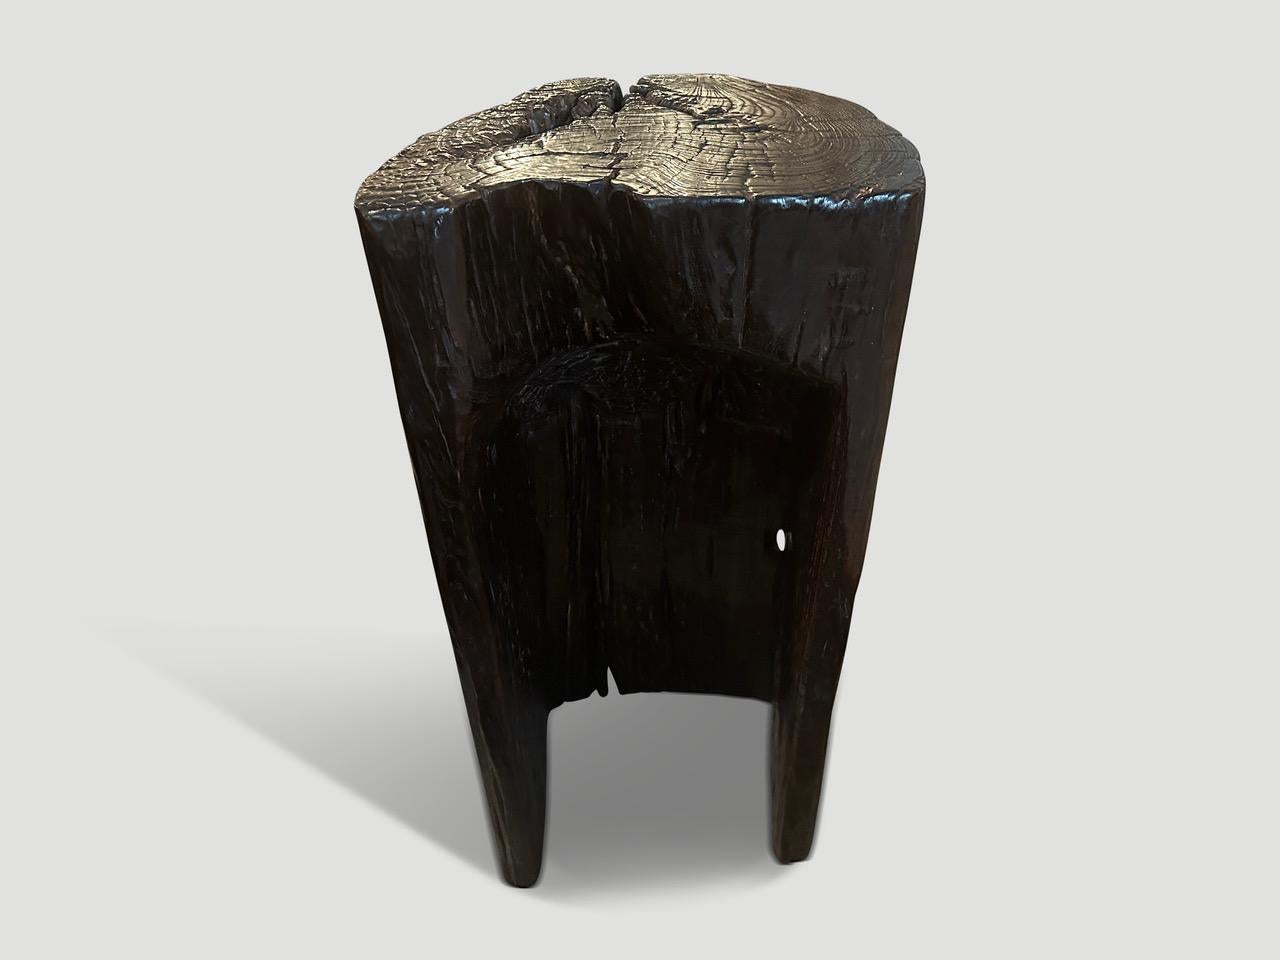 Mid-20th Century Andrianna Shamaris Sculptural Suar Wood Side Table or Pedestal For Sale